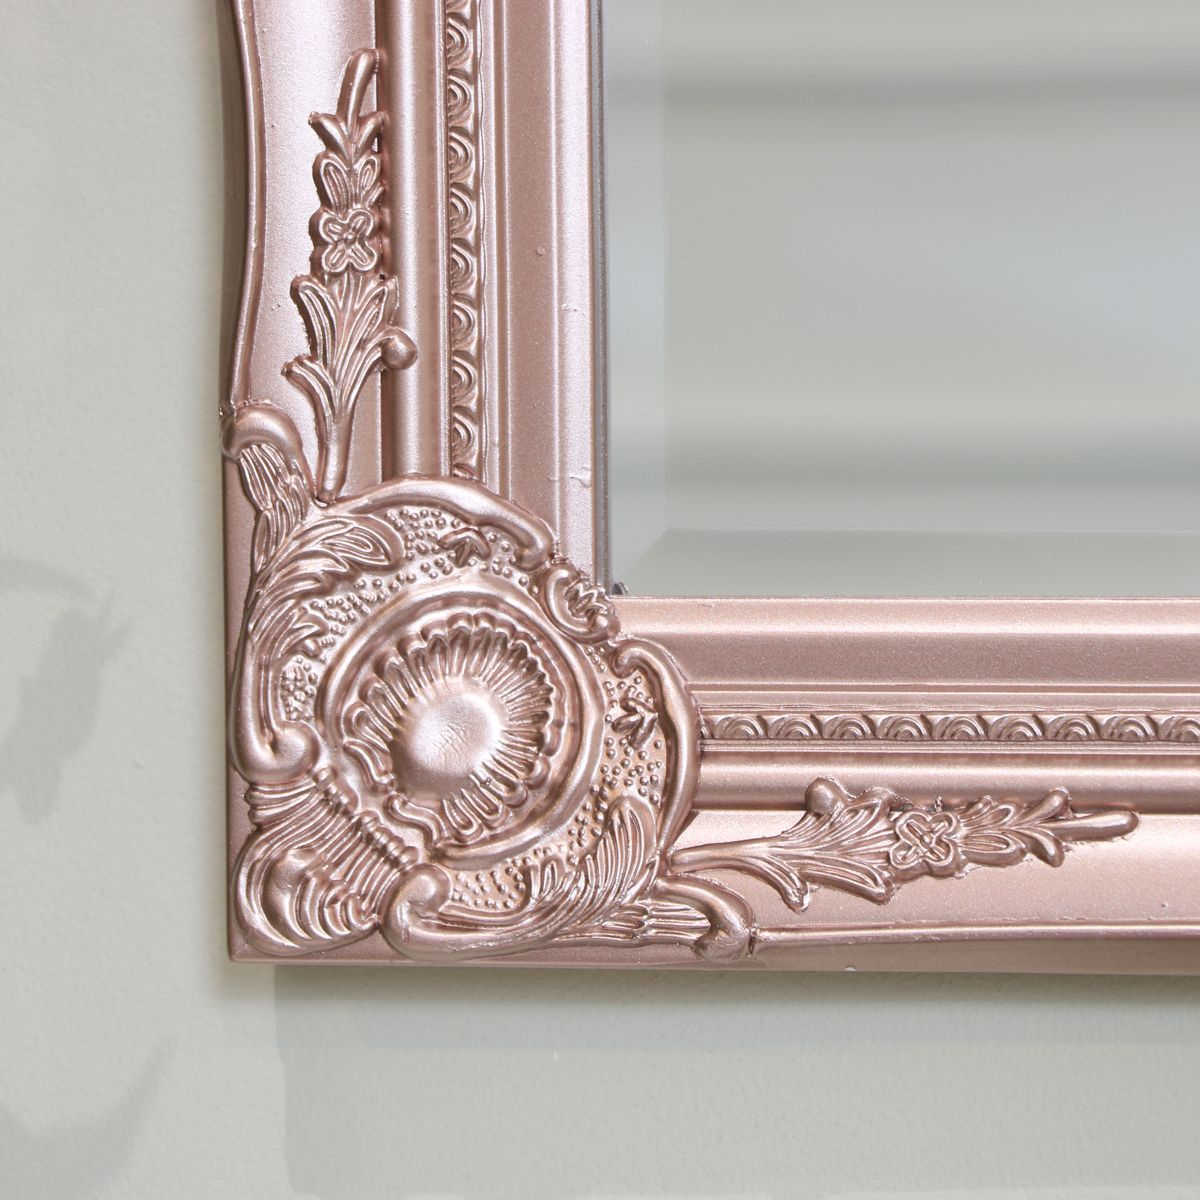 Ornate Rose Gold Pink Wall Mirror With Bevelled Glass Throughout Pink Wall Mirrors (View 12 of 15)